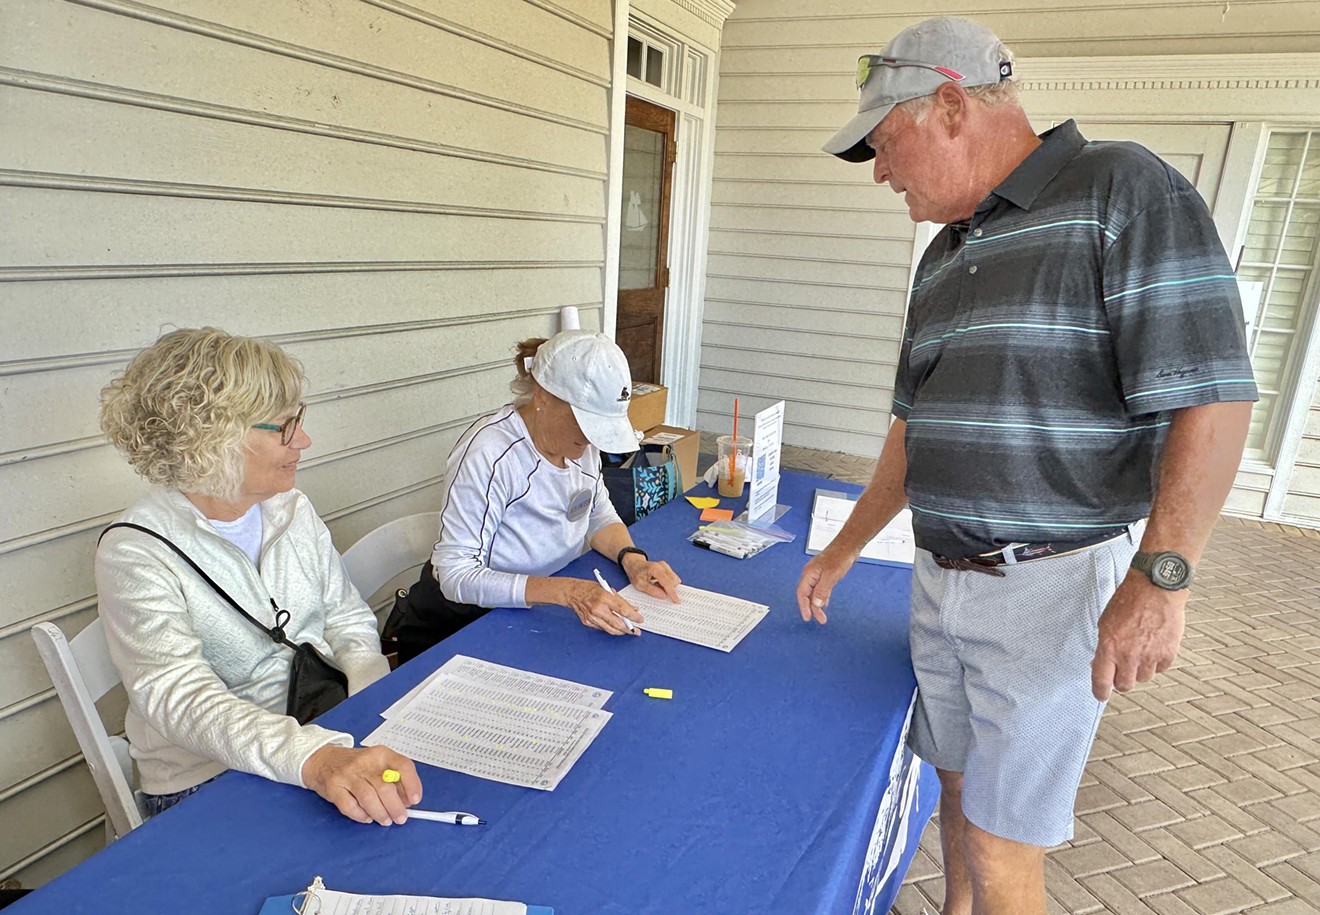 Savannah Center for Blind and Low Vision’s 9th Annual JIT FOREVISION Golf Tournament